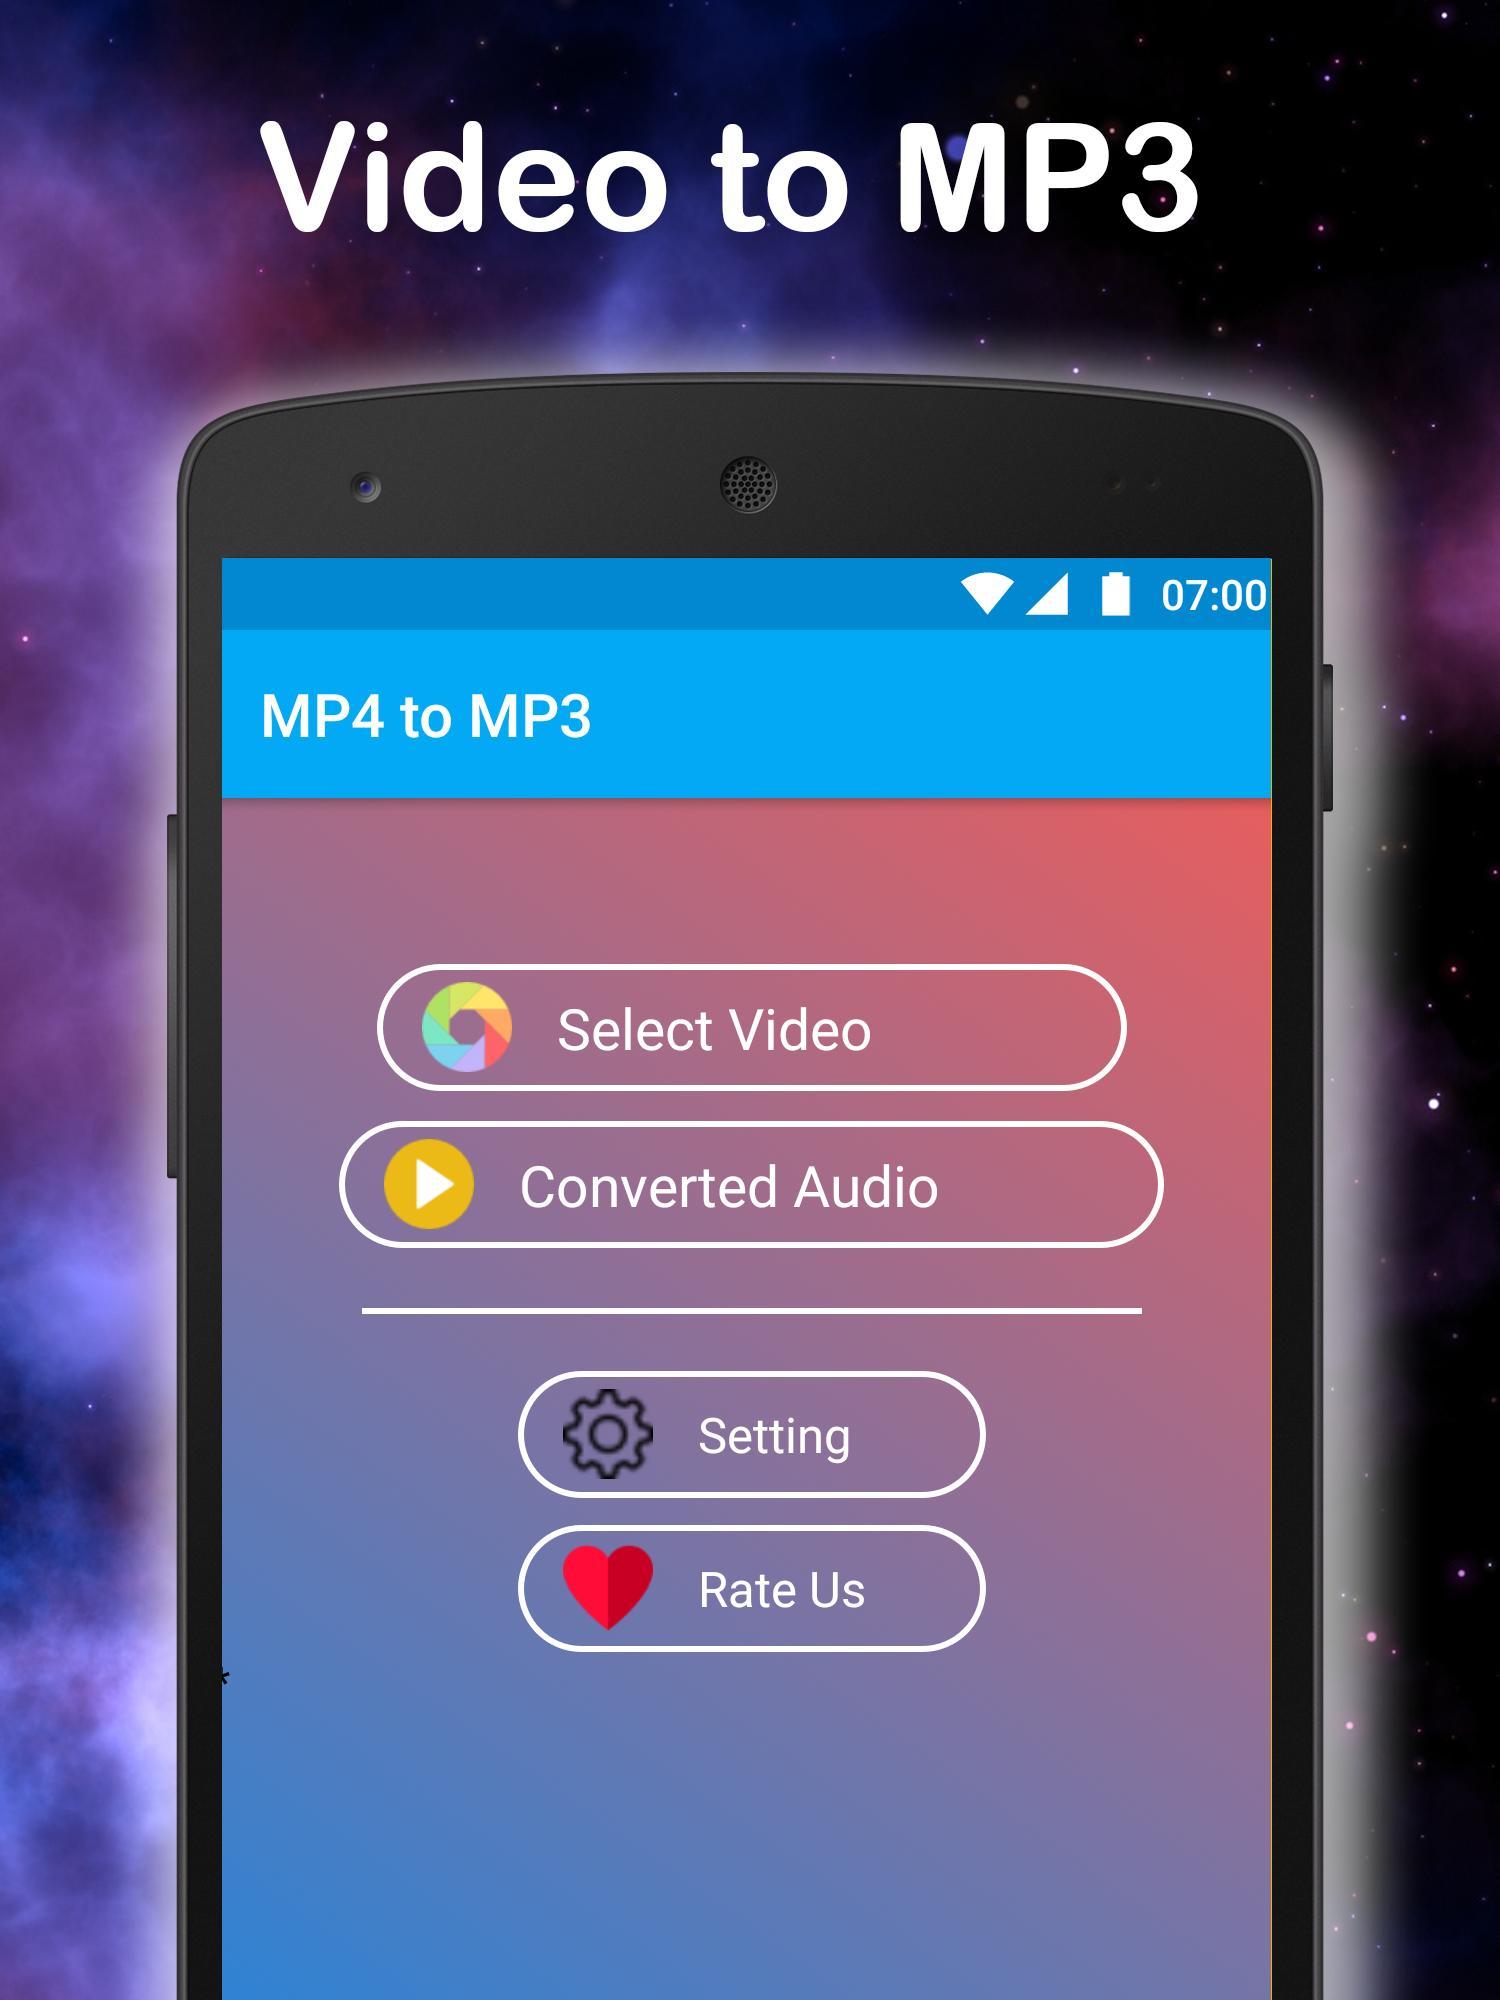 Mp4 to Mp3 converter for Android - APK Download